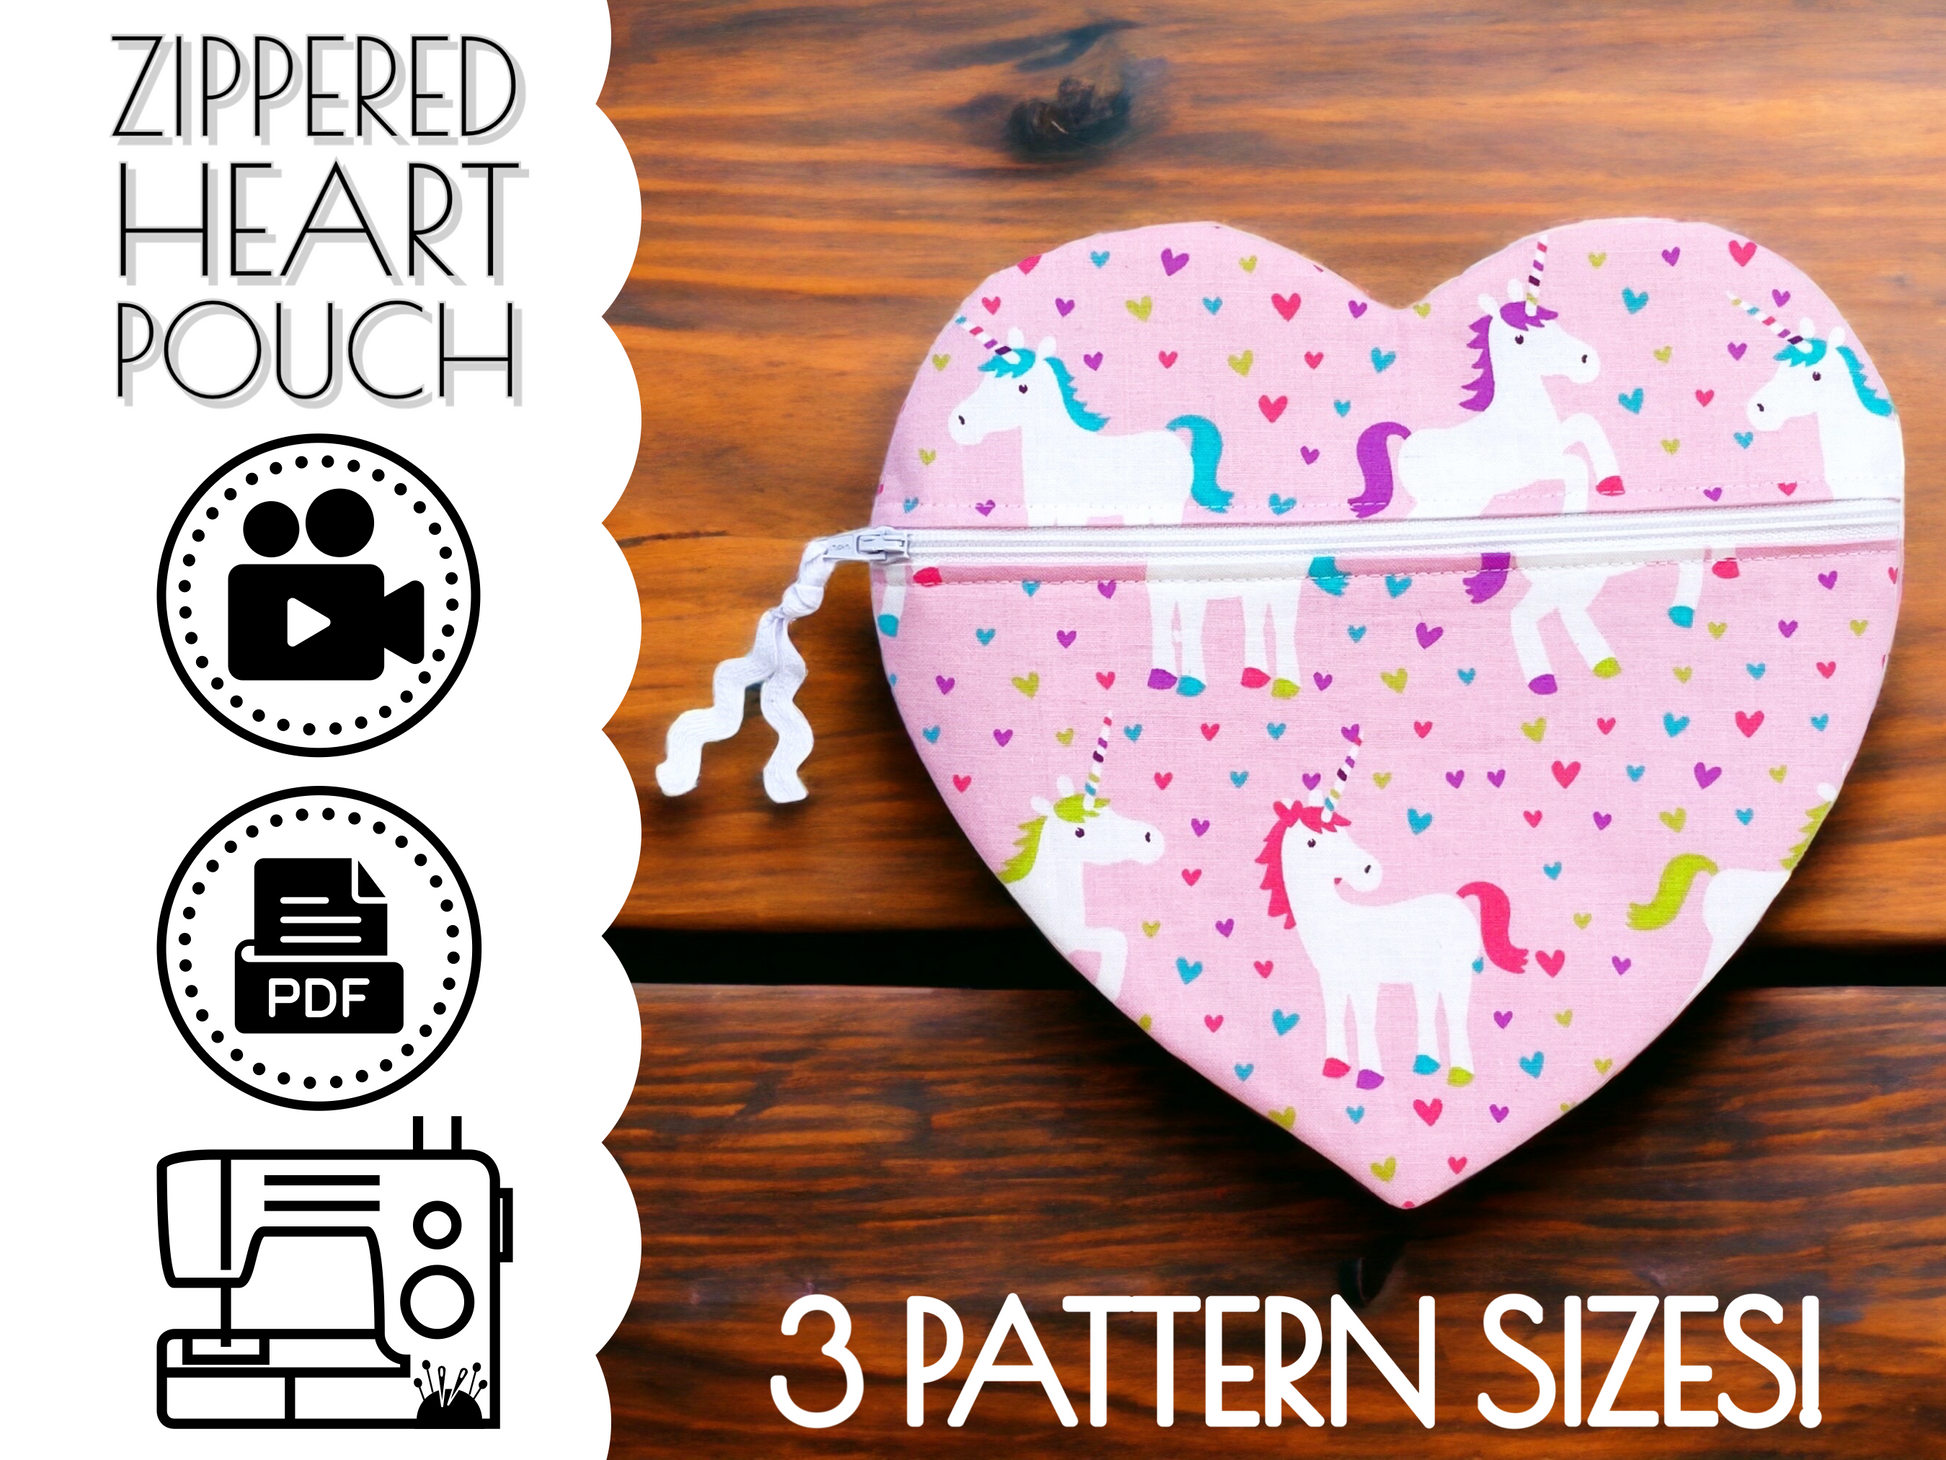 Heart shaped pouch sewing pattern, heart shaped purse sewing pattern, zipper heart bag sewing pattern, aloha sewing company, diy heart purse